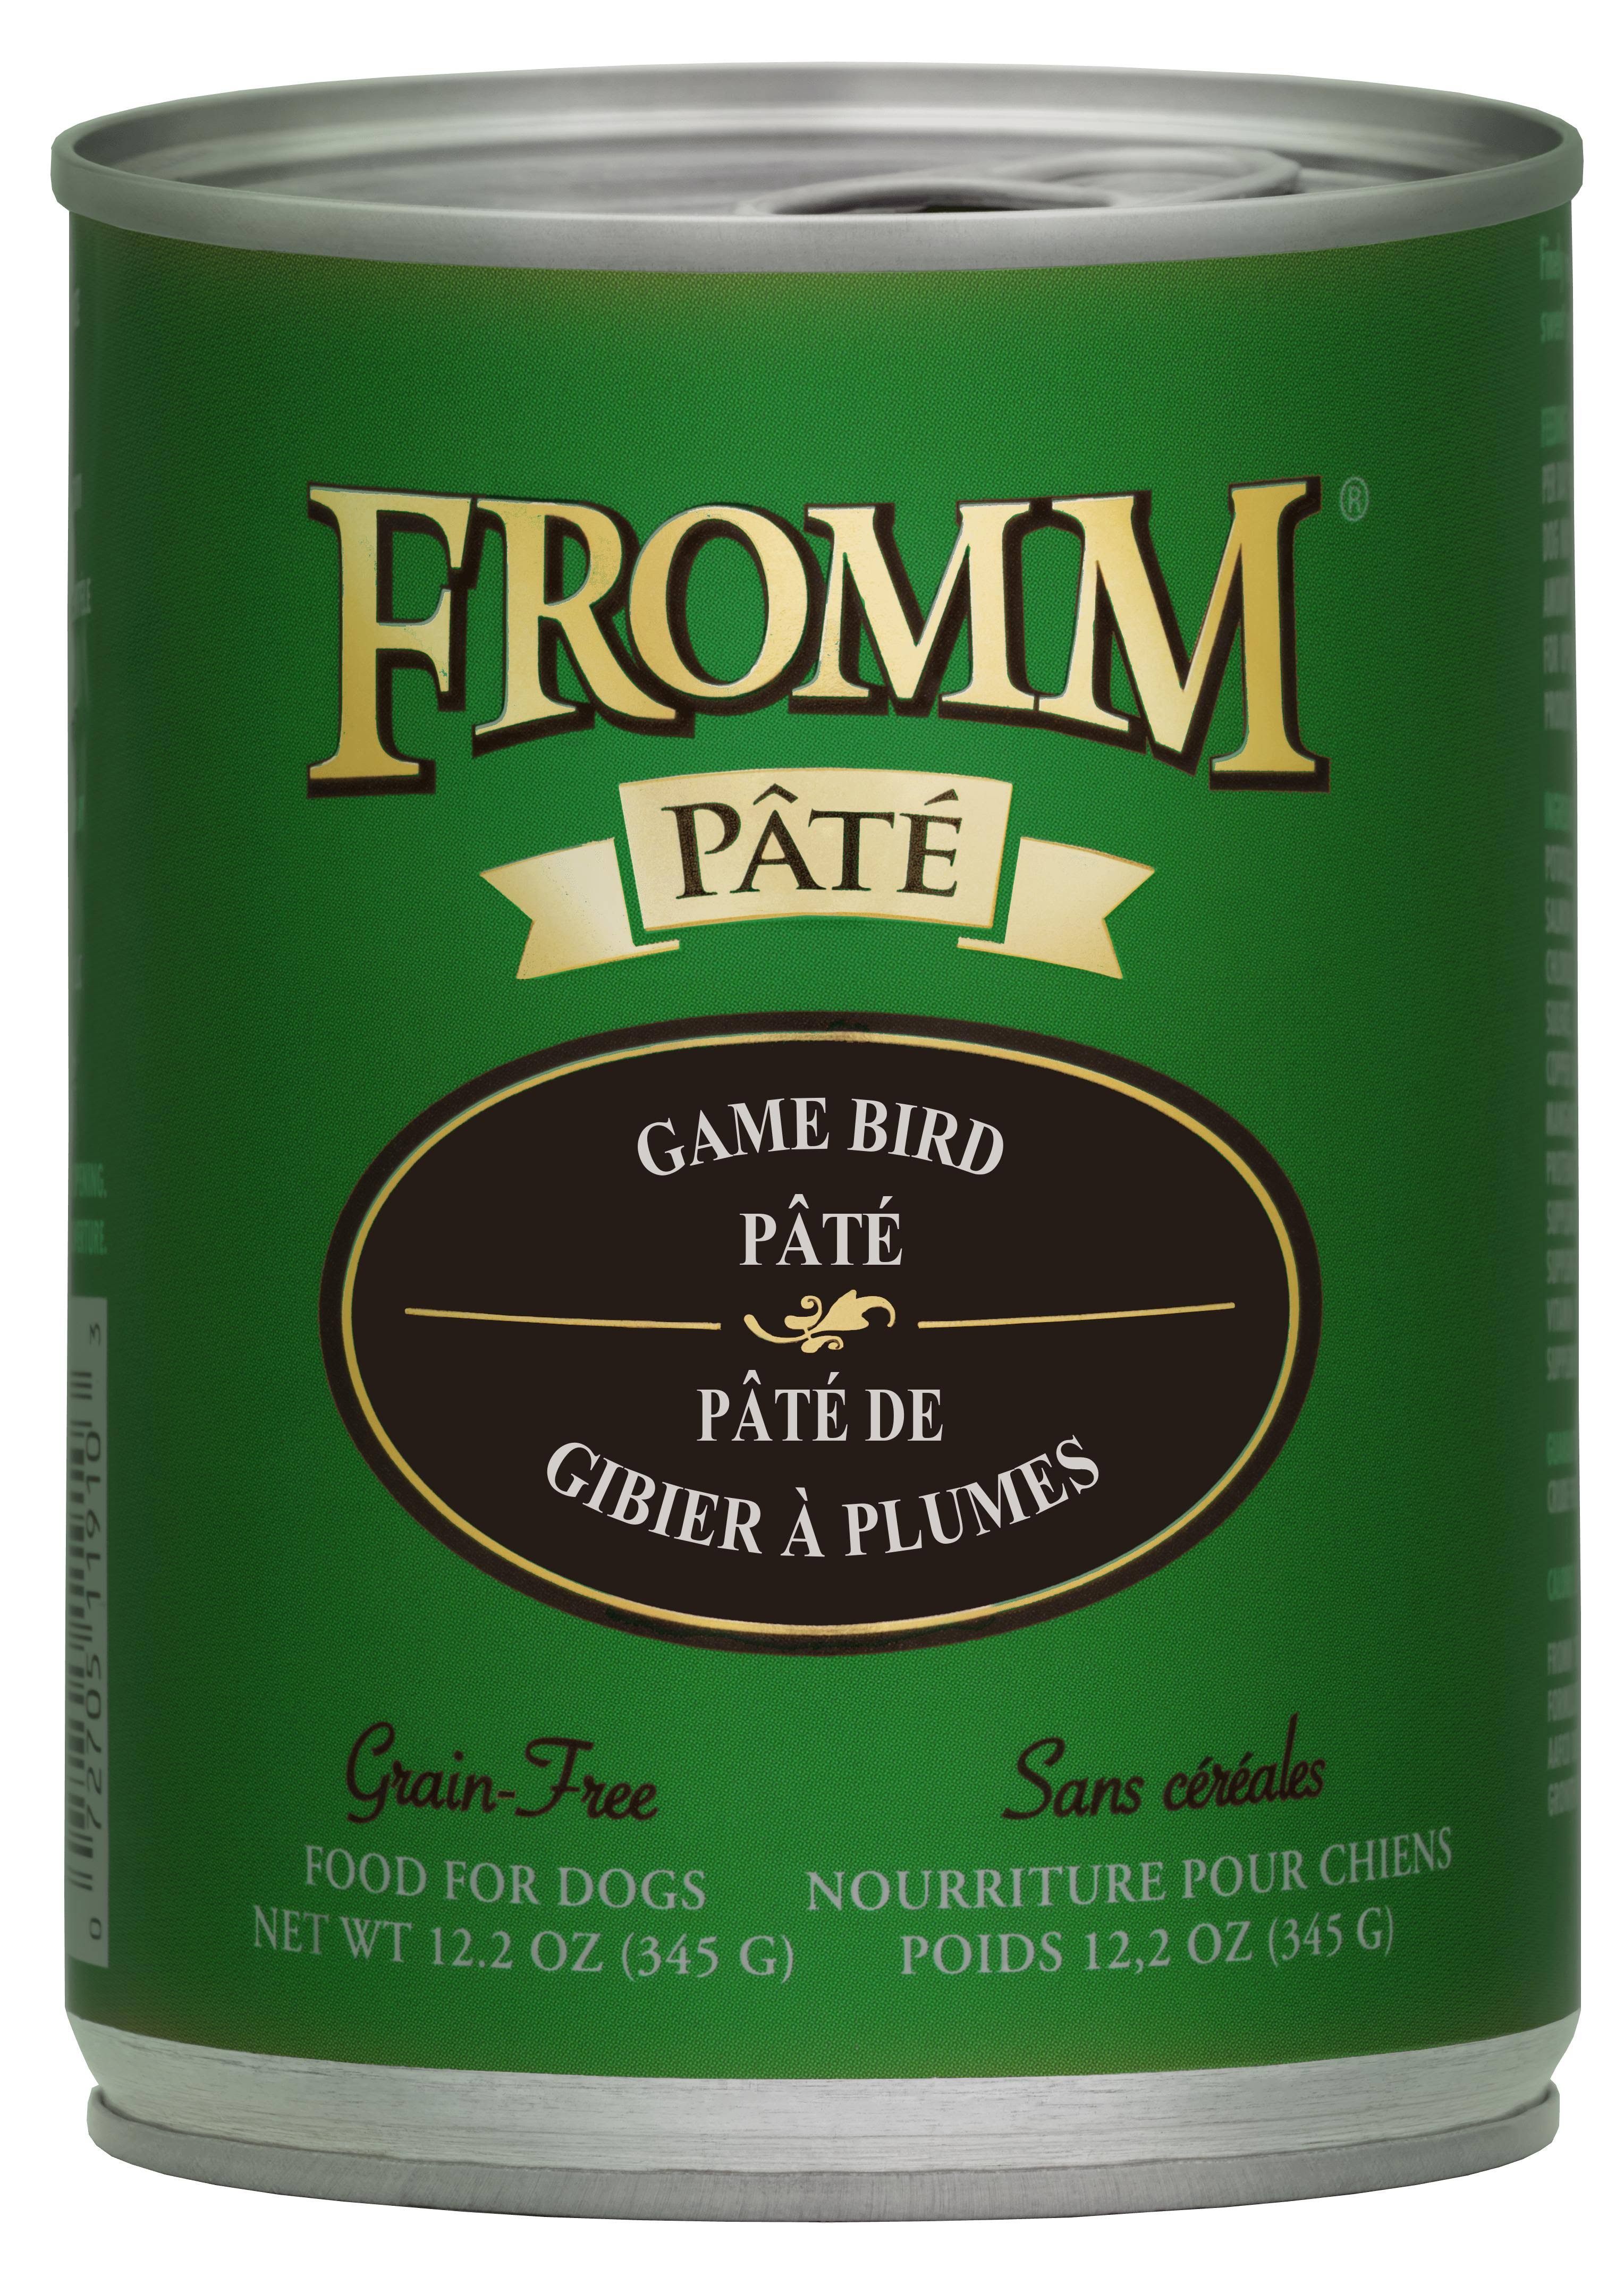 Fromm Game Bird Pate Canned Dog Food, 12.2-oz